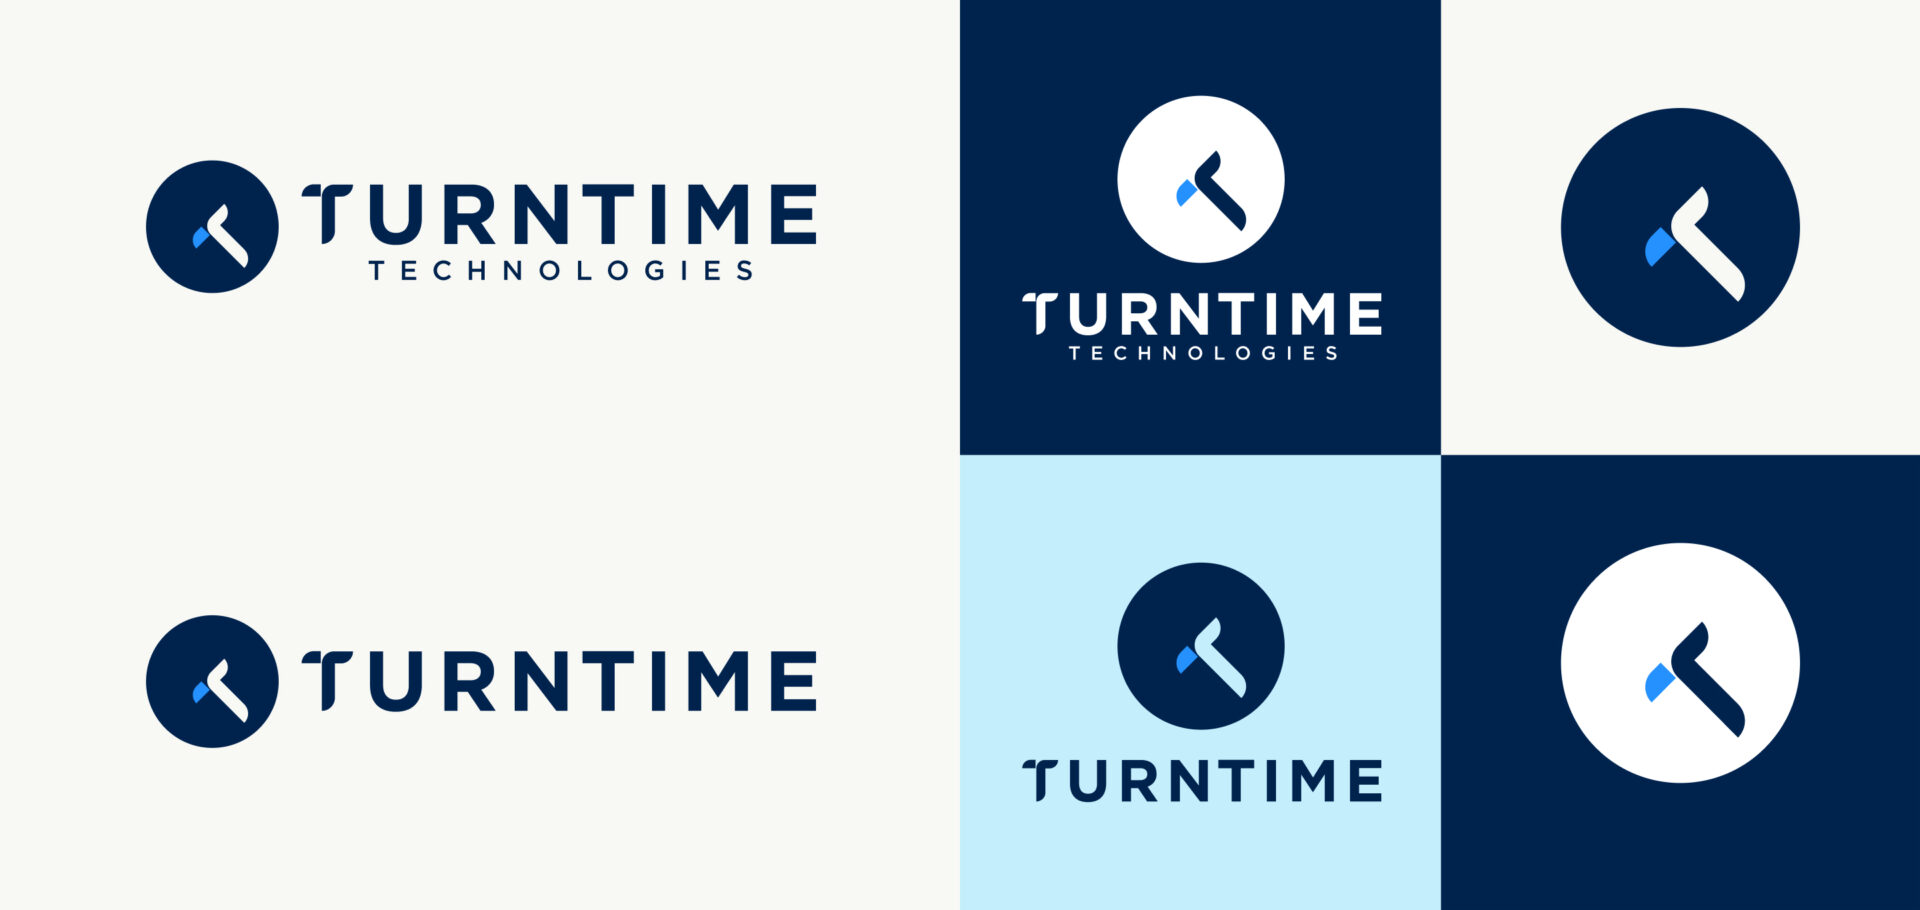 The logotype and symbol for Turntime Technologies